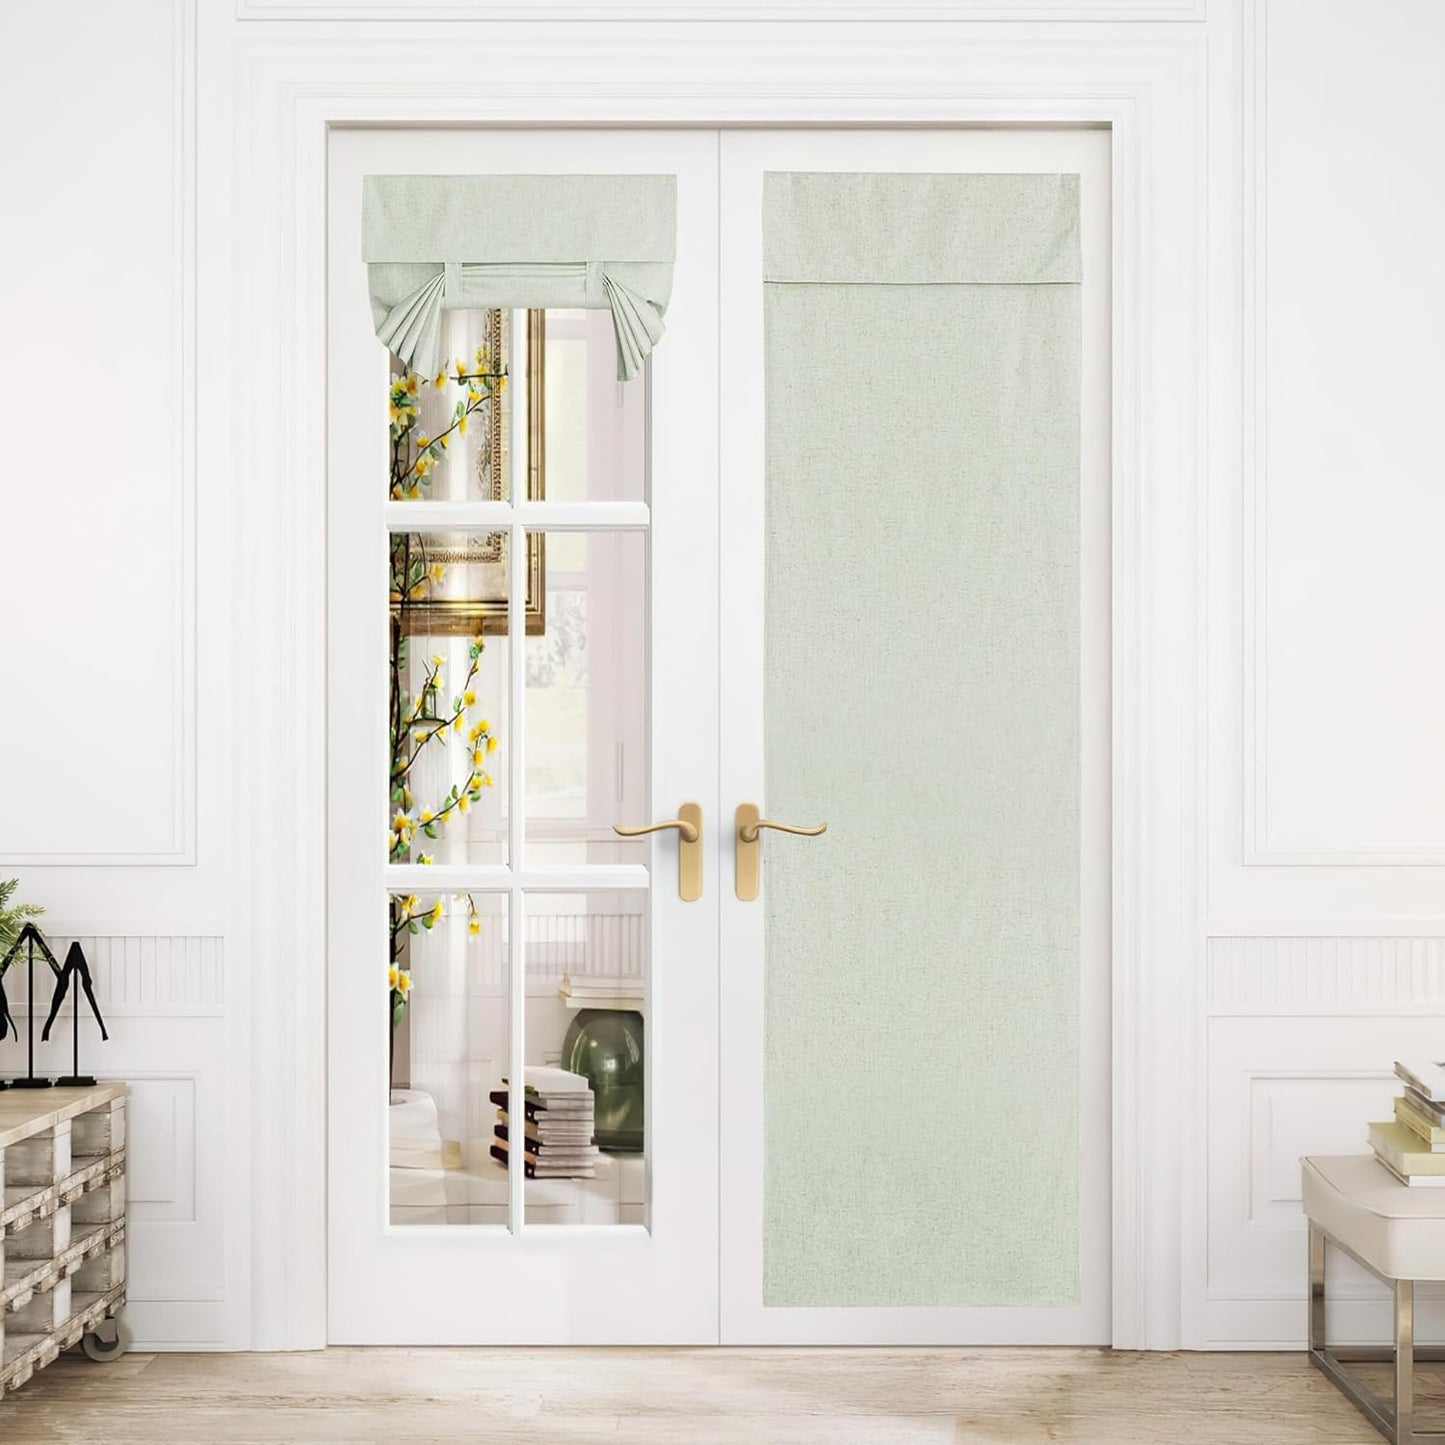 NICETOWN Linen Door Curtain for Door Window, Farmhouse French Door Curtain Shade for Kitchen Bathroom Energy Saving 100% Blackout Tie up Shade for Patio Sliding Glass, 1 Panel, Natural, 26" W X 72" L  NICETOWN Sage Green W26 X L80 